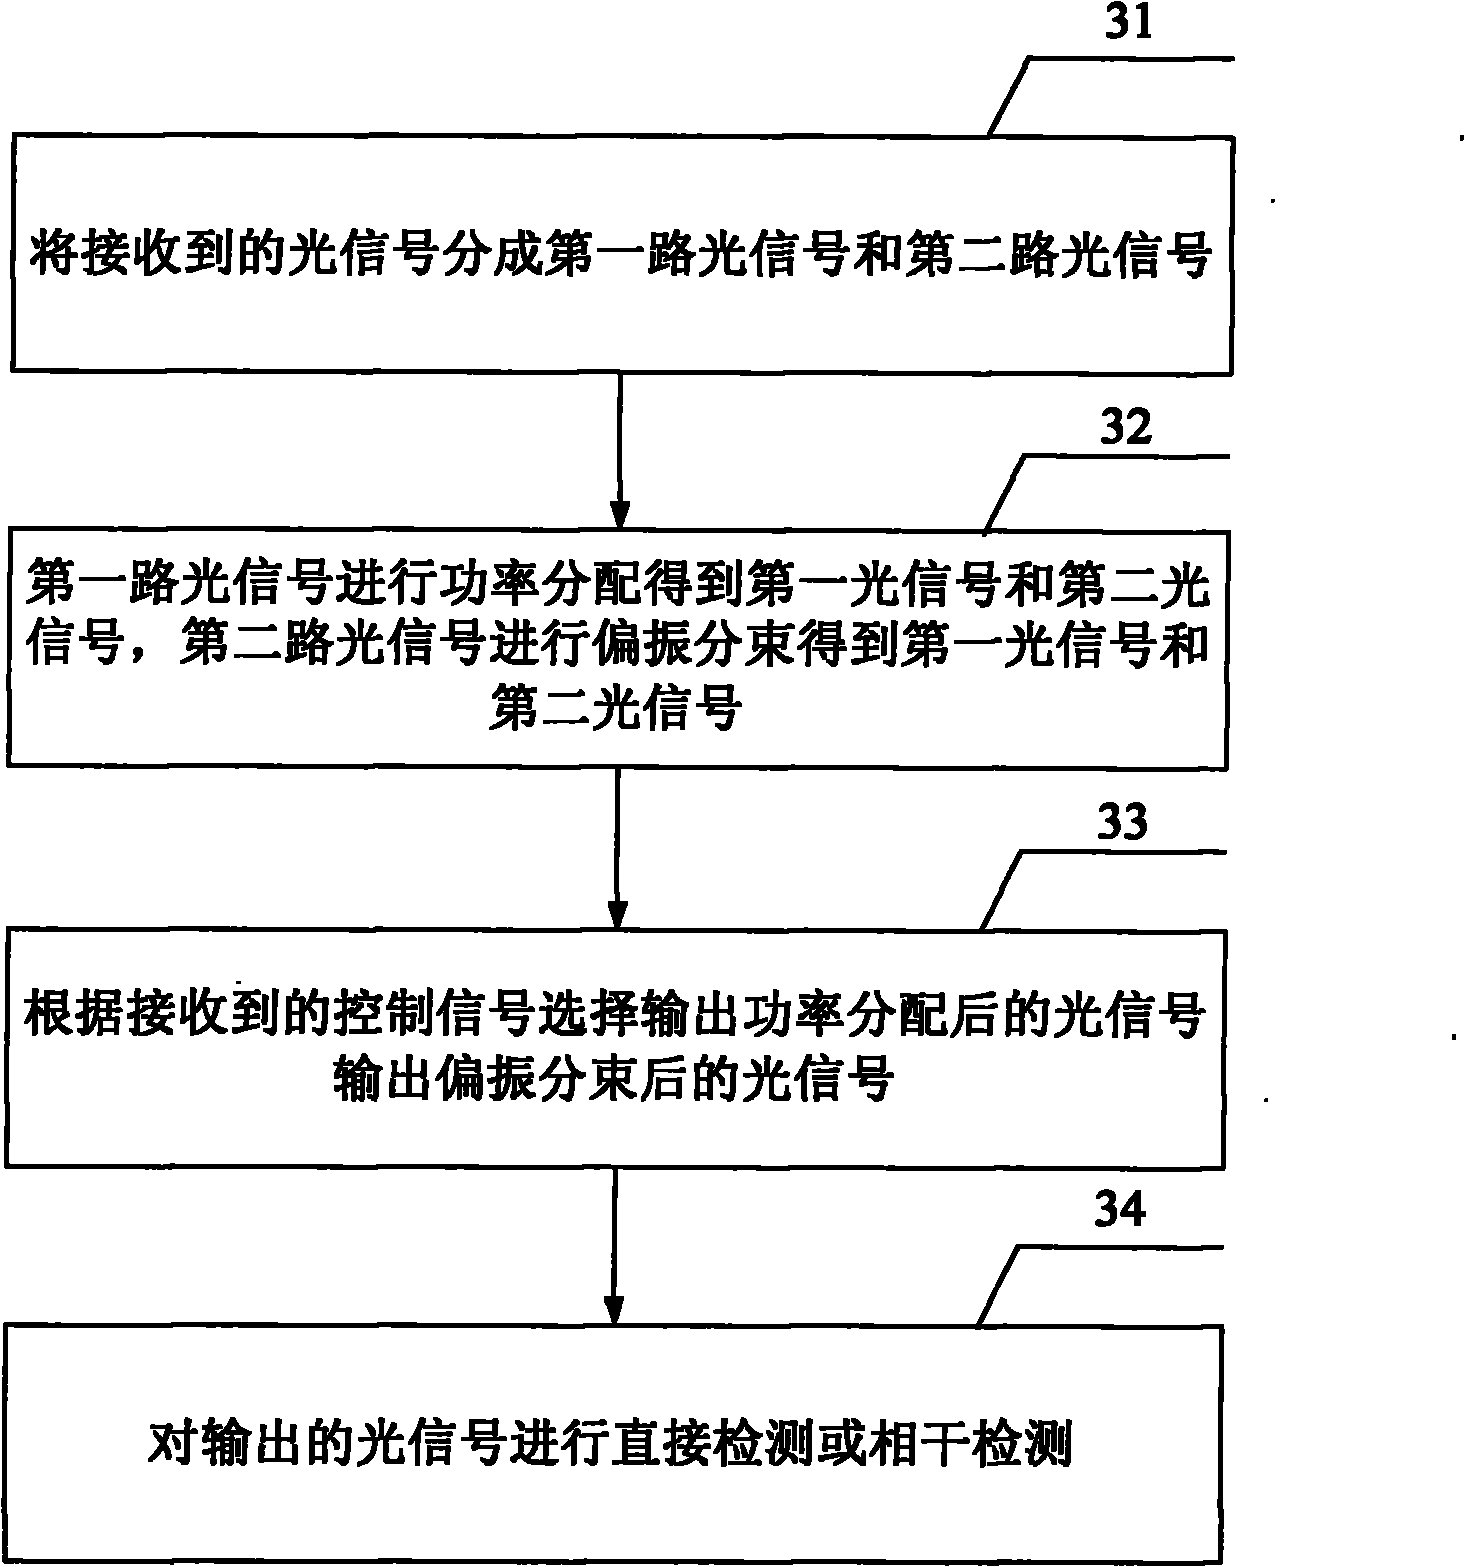 Method and device for realizing direct detection and coherent detection